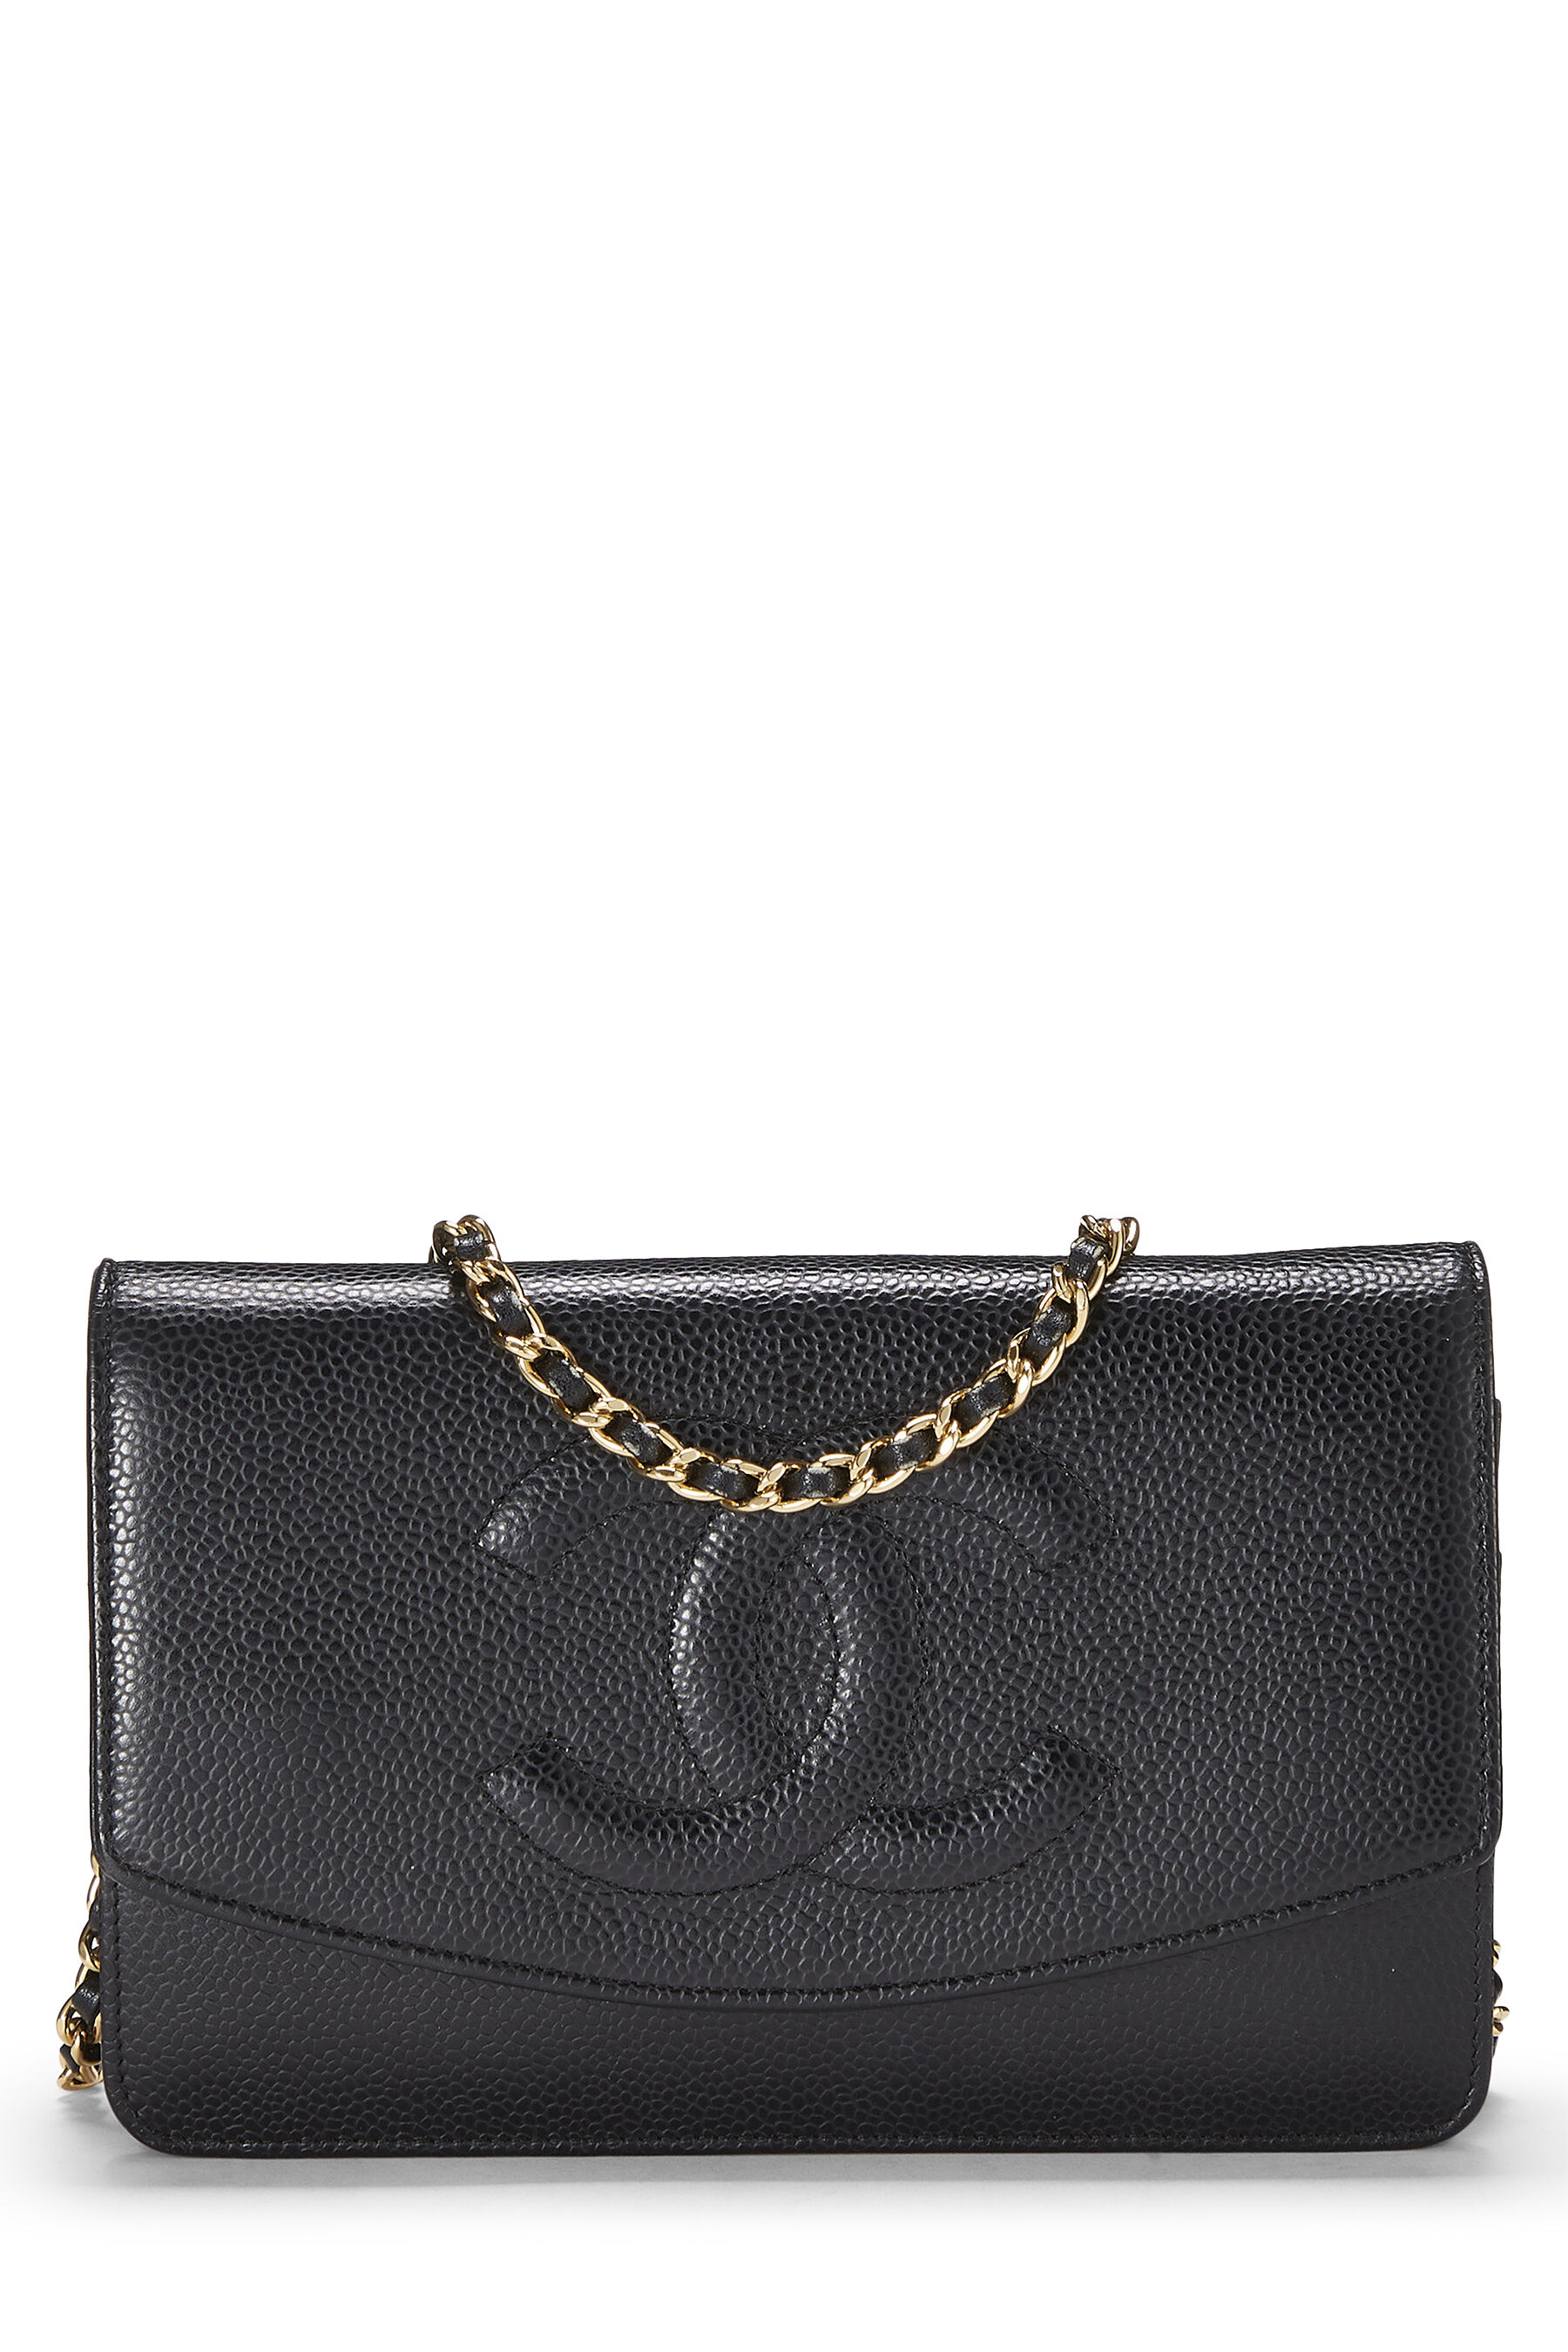 Chanel - Black Caviar Timeless Wallet on Chain (WOC)